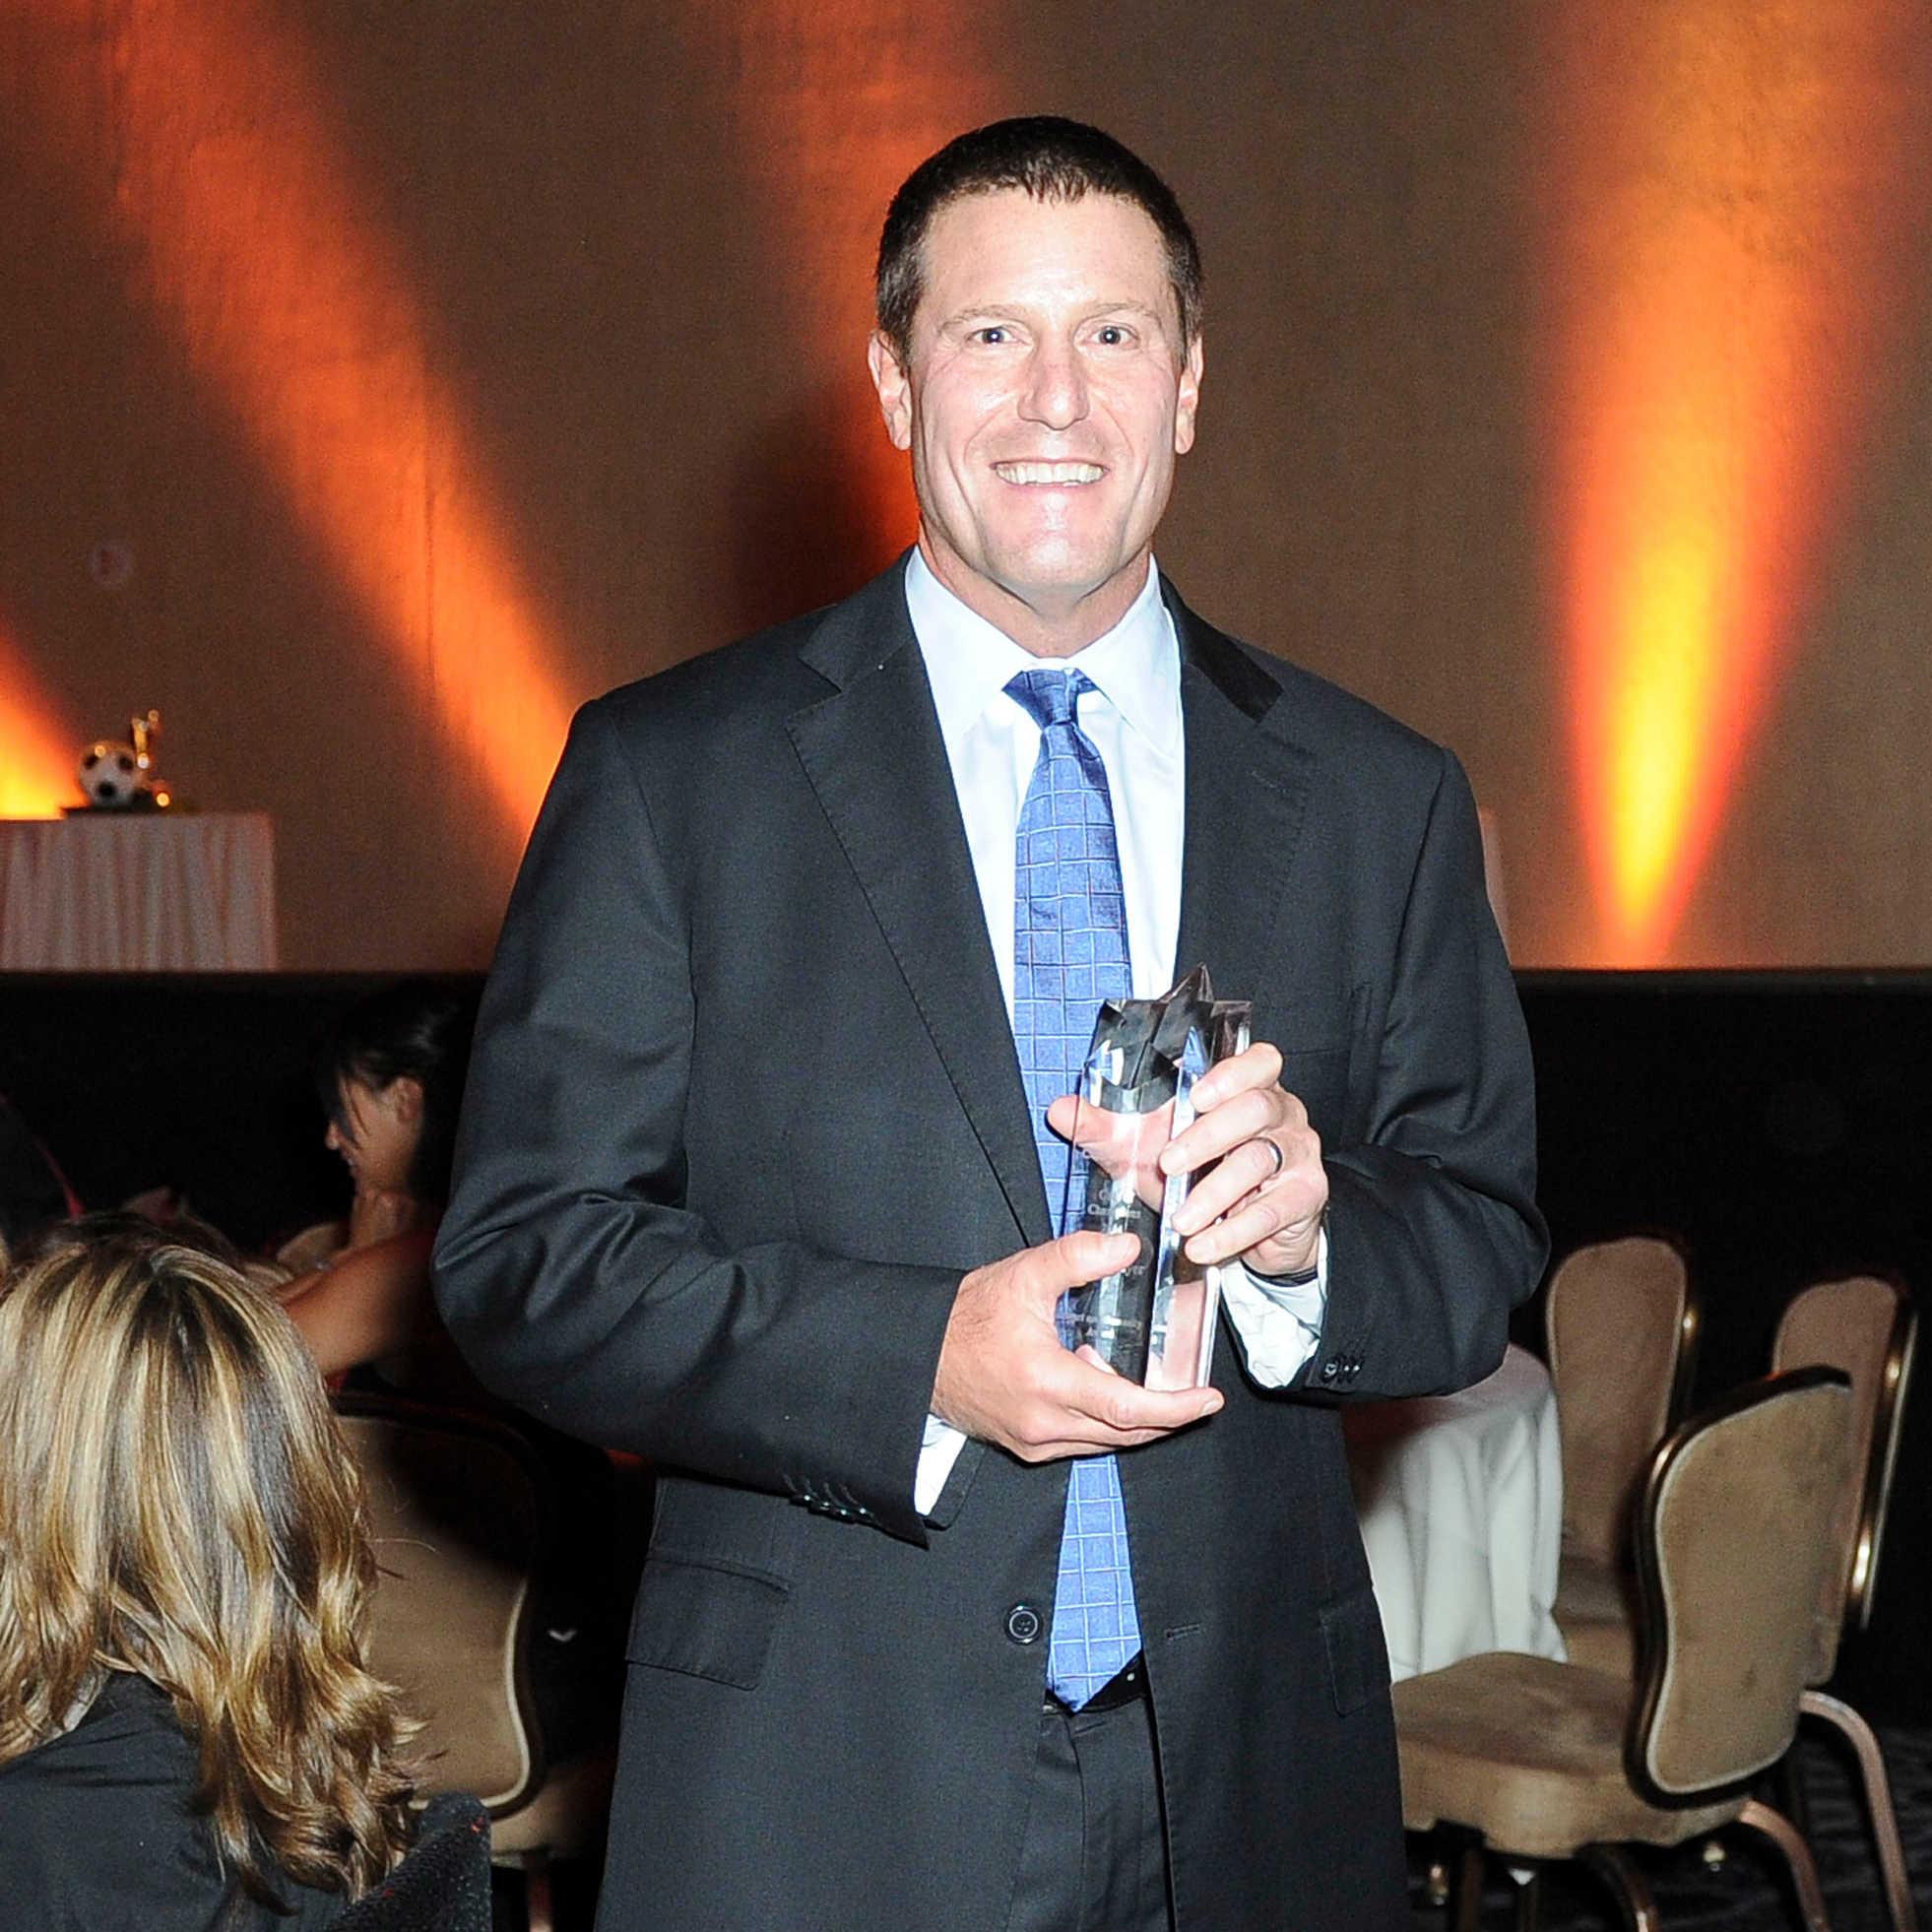 Walt Disney Company Executive Vice President Kevin Mayer is honored at the CoachArt Gala Of Champions at The Beverly Hilton Hotel on October 16, 2014 in Beverly Hills, California